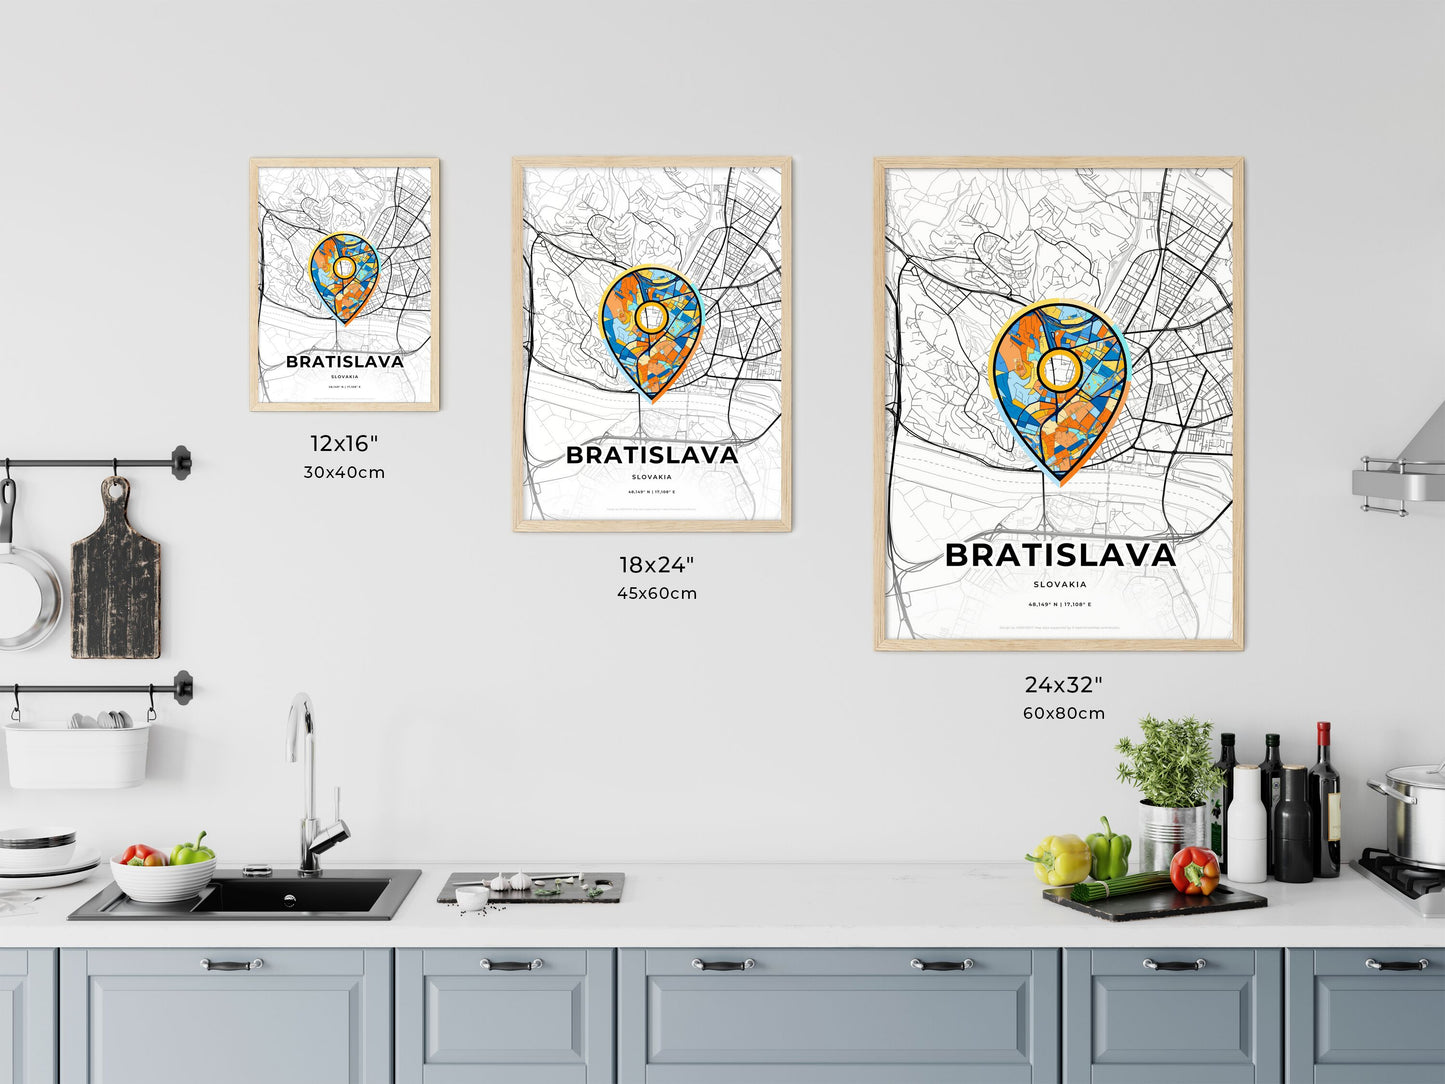 BRATISLAVA SLOVAKIA minimal art map with a colorful icon. Where it all began, Couple map gift.